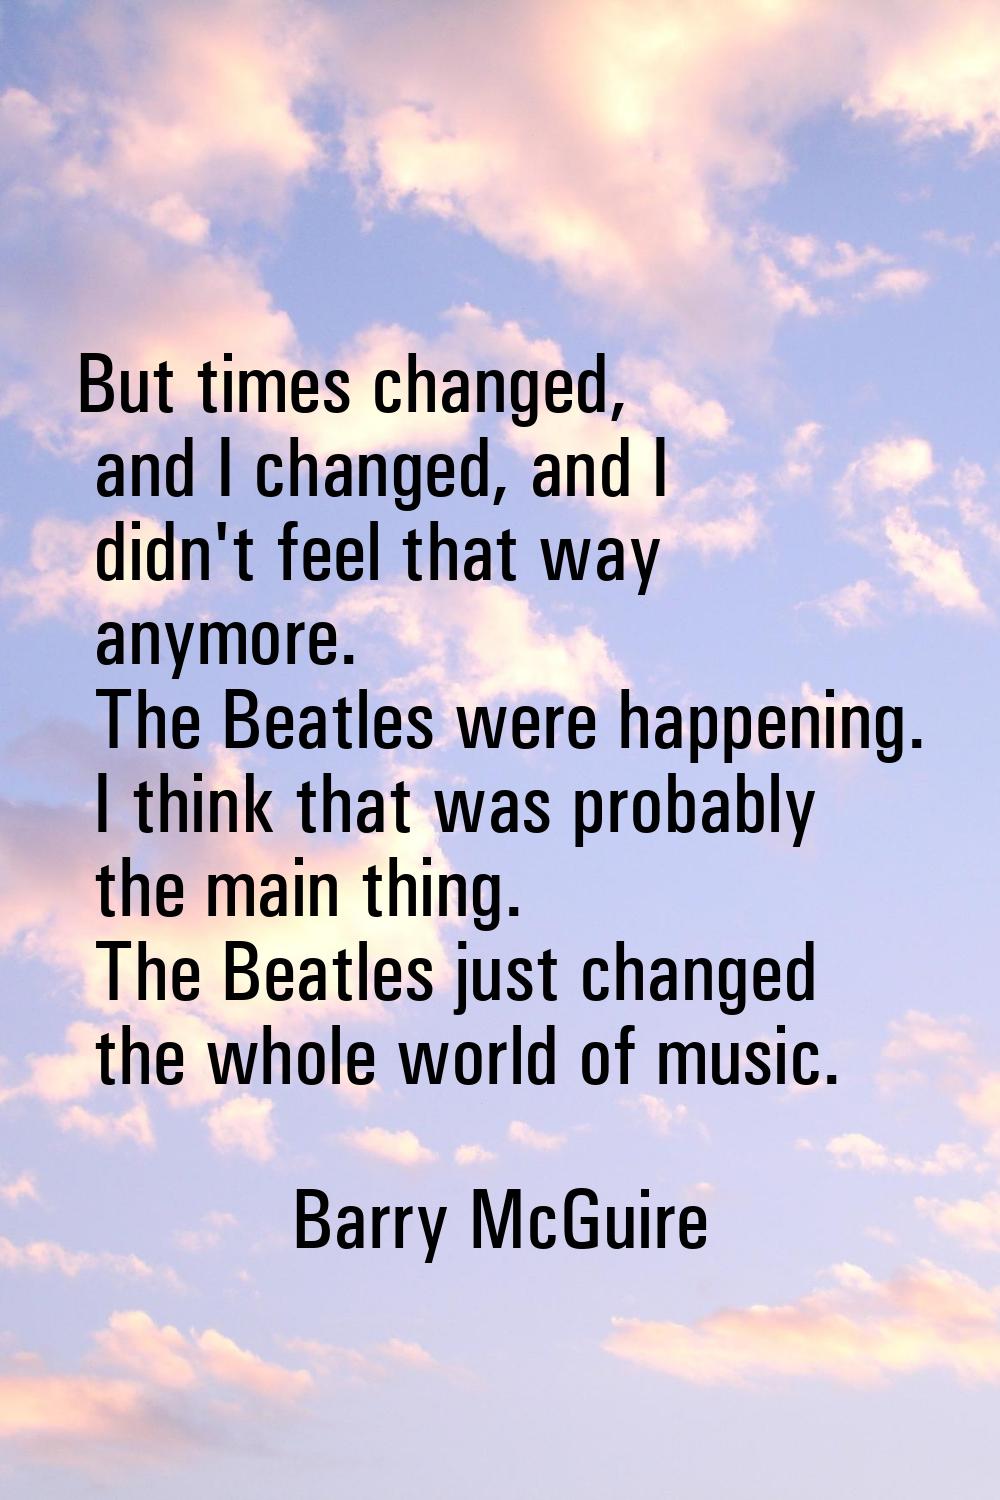 But times changed, and I changed, and I didn't feel that way anymore. The Beatles were happening. I